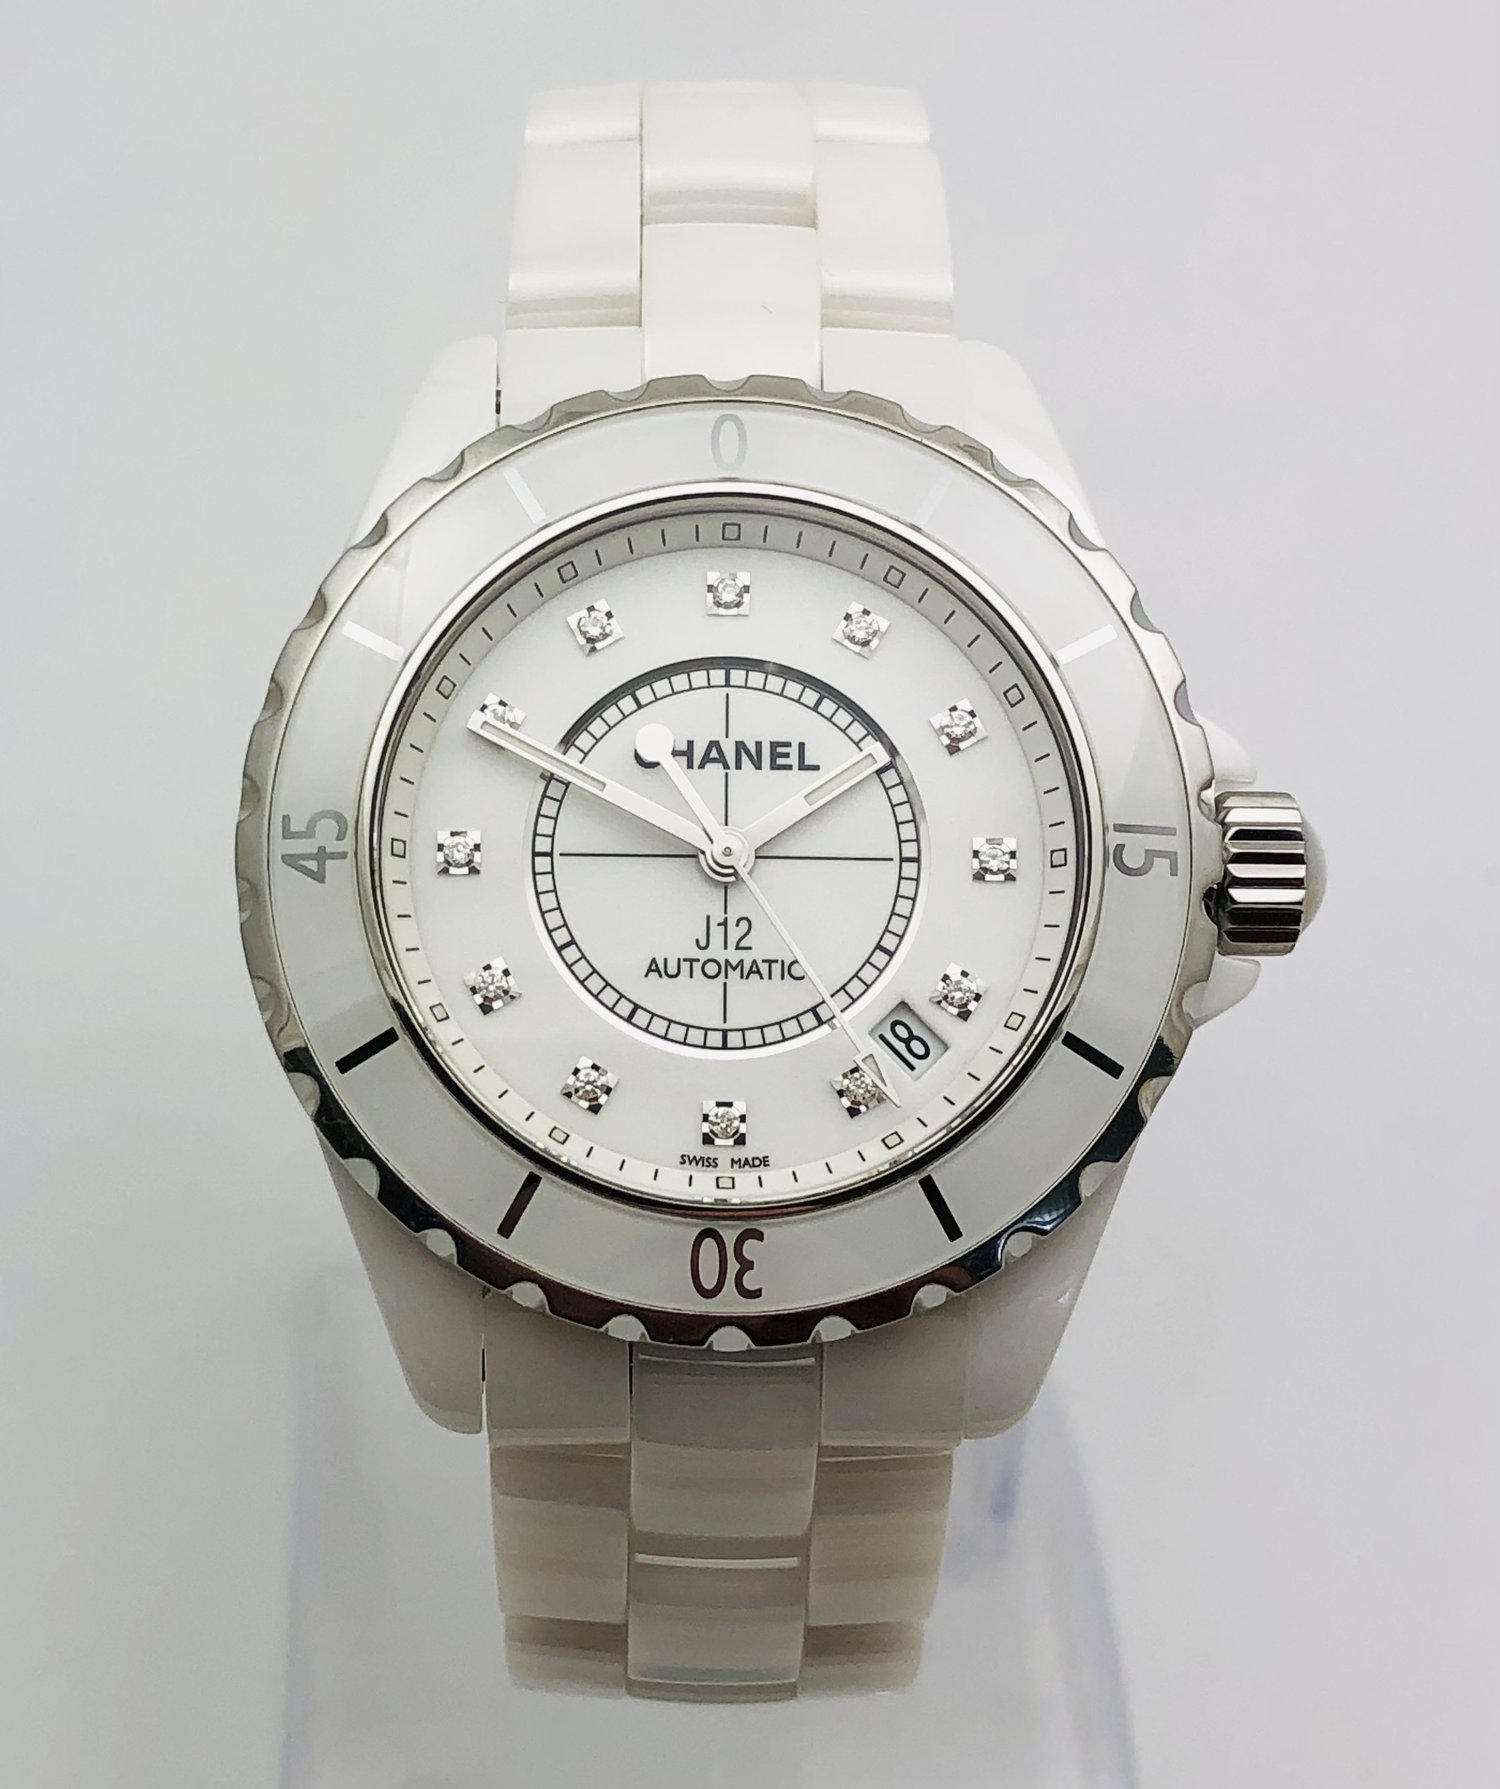 CHANEL J12 Full Size Automatic White CERAMIC Diamond Dial Ladies Wristwatch  Ref H1629 Box and Papers — About Time